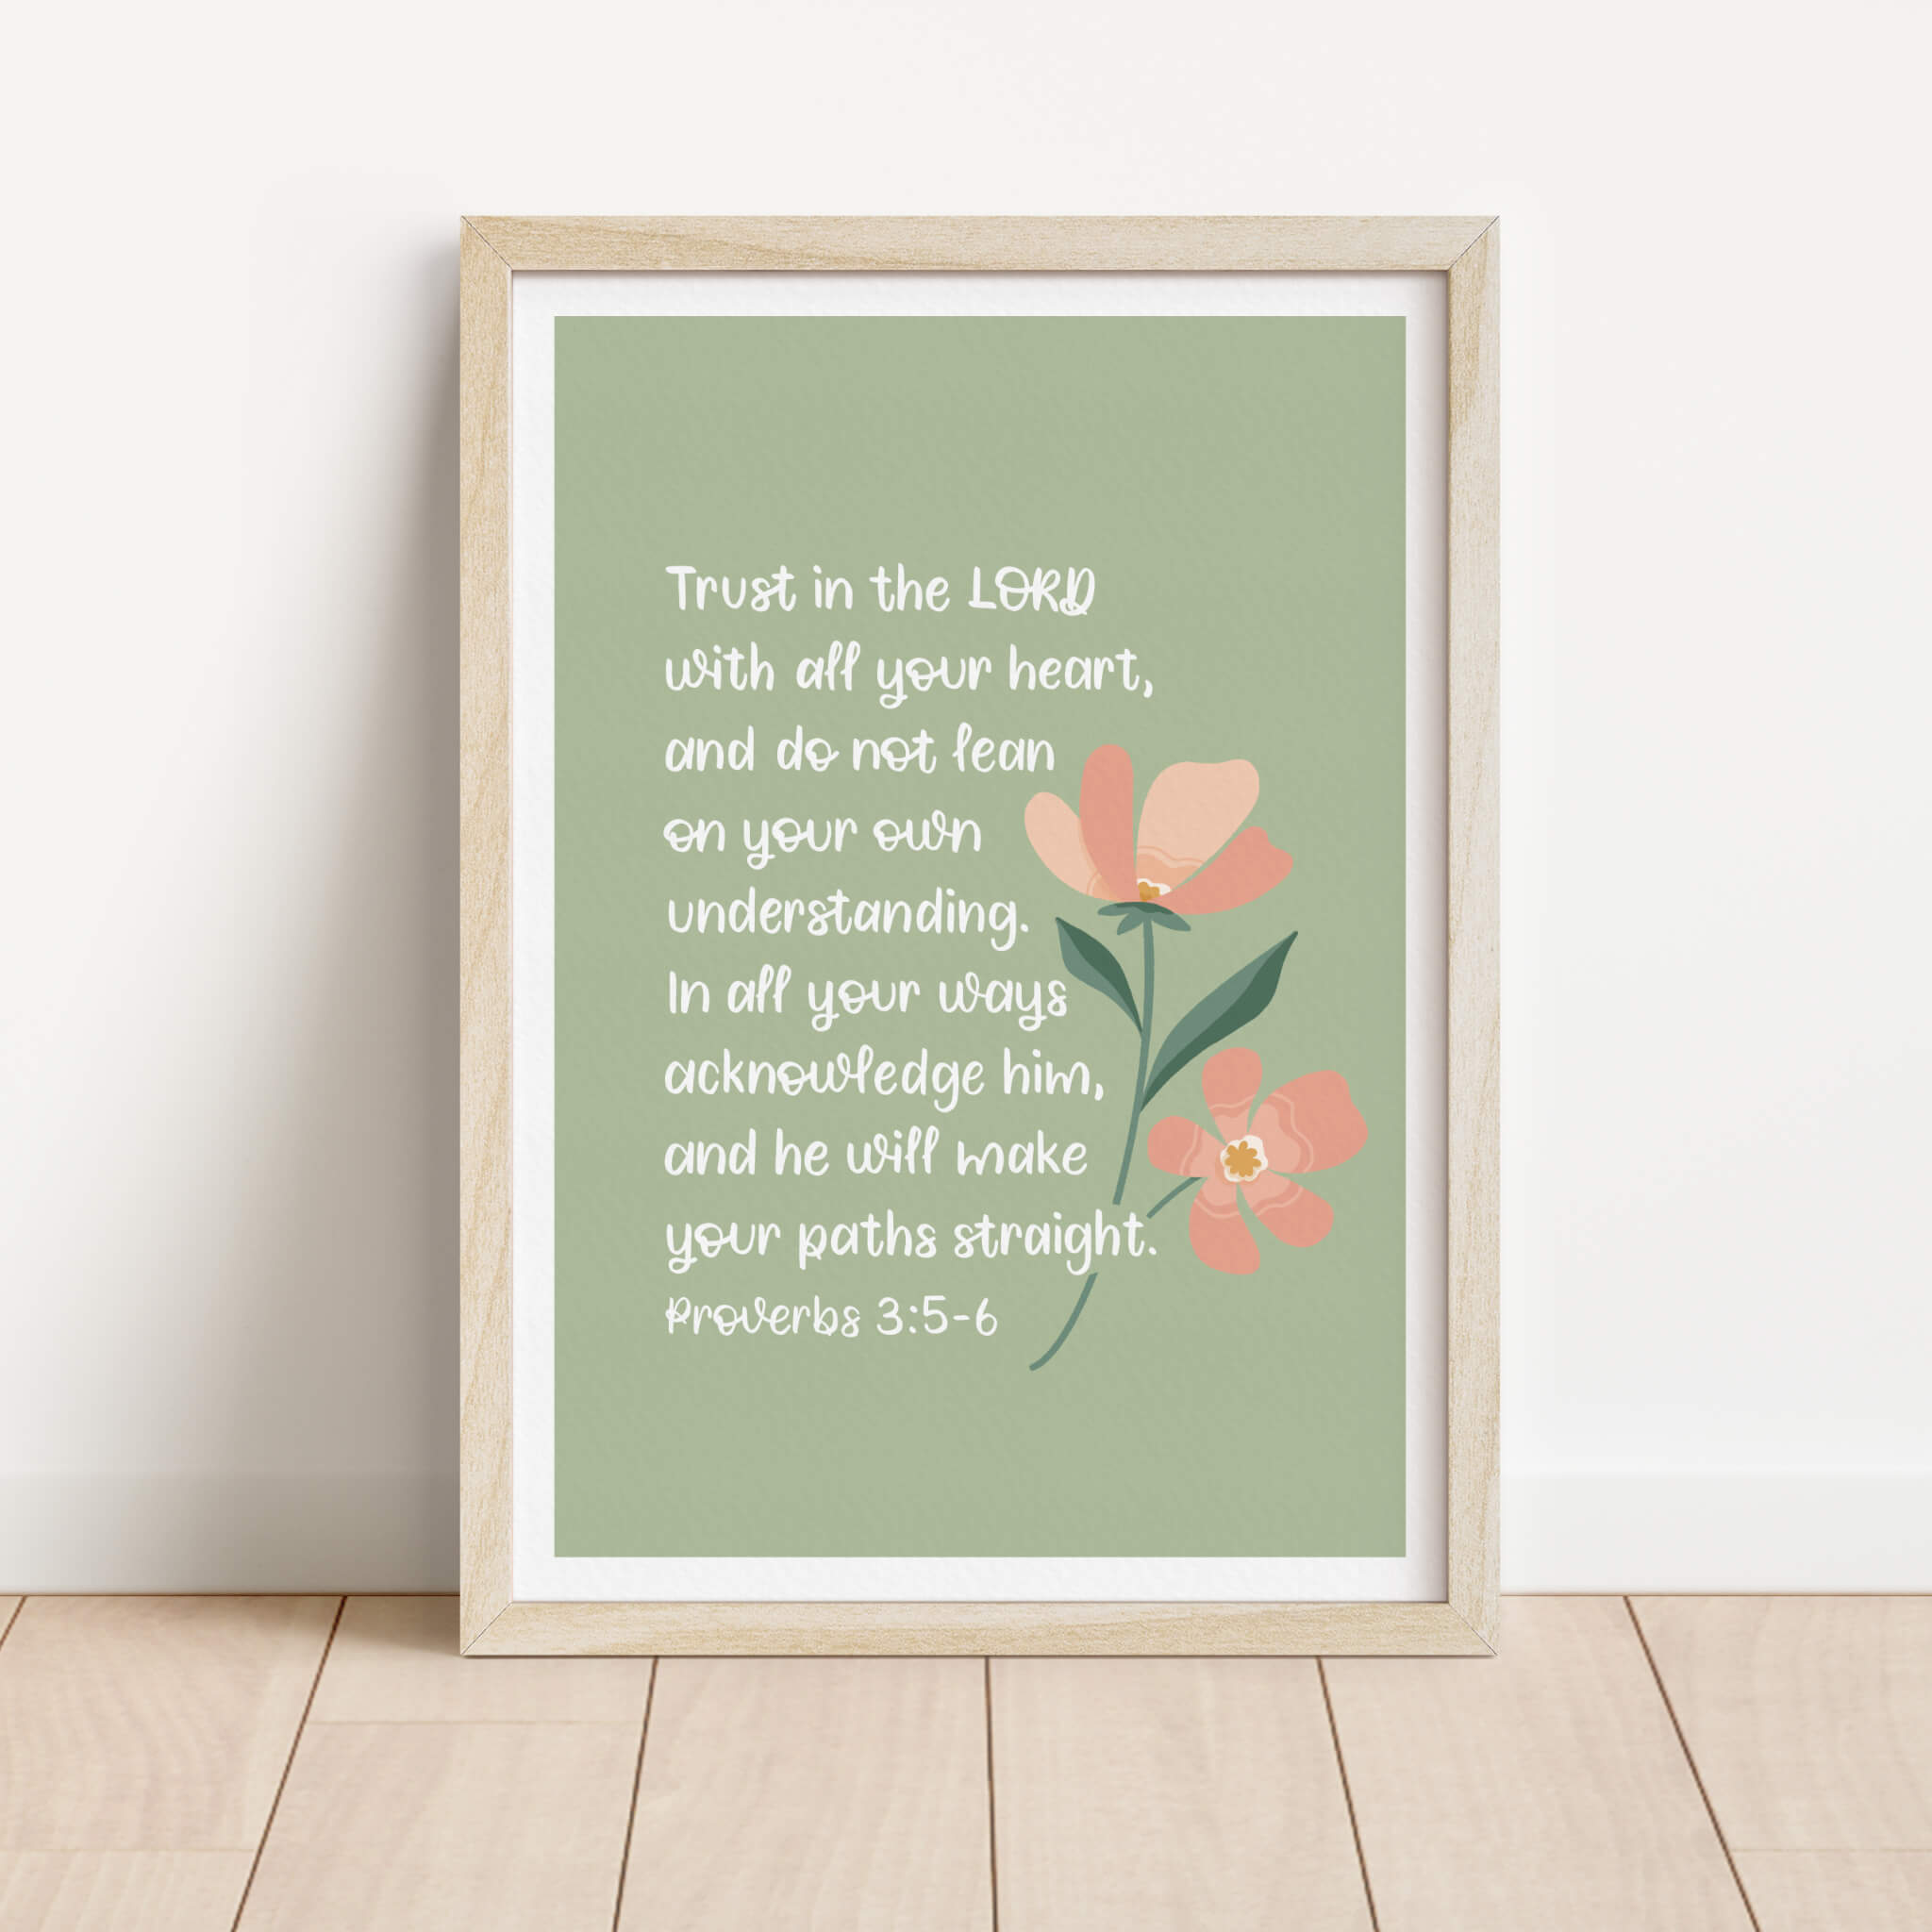 Trust In The Lord With All Your Heart Bible Verse Print - Proverbs 3 - Modern Hand-Lettering and Floral Illustration